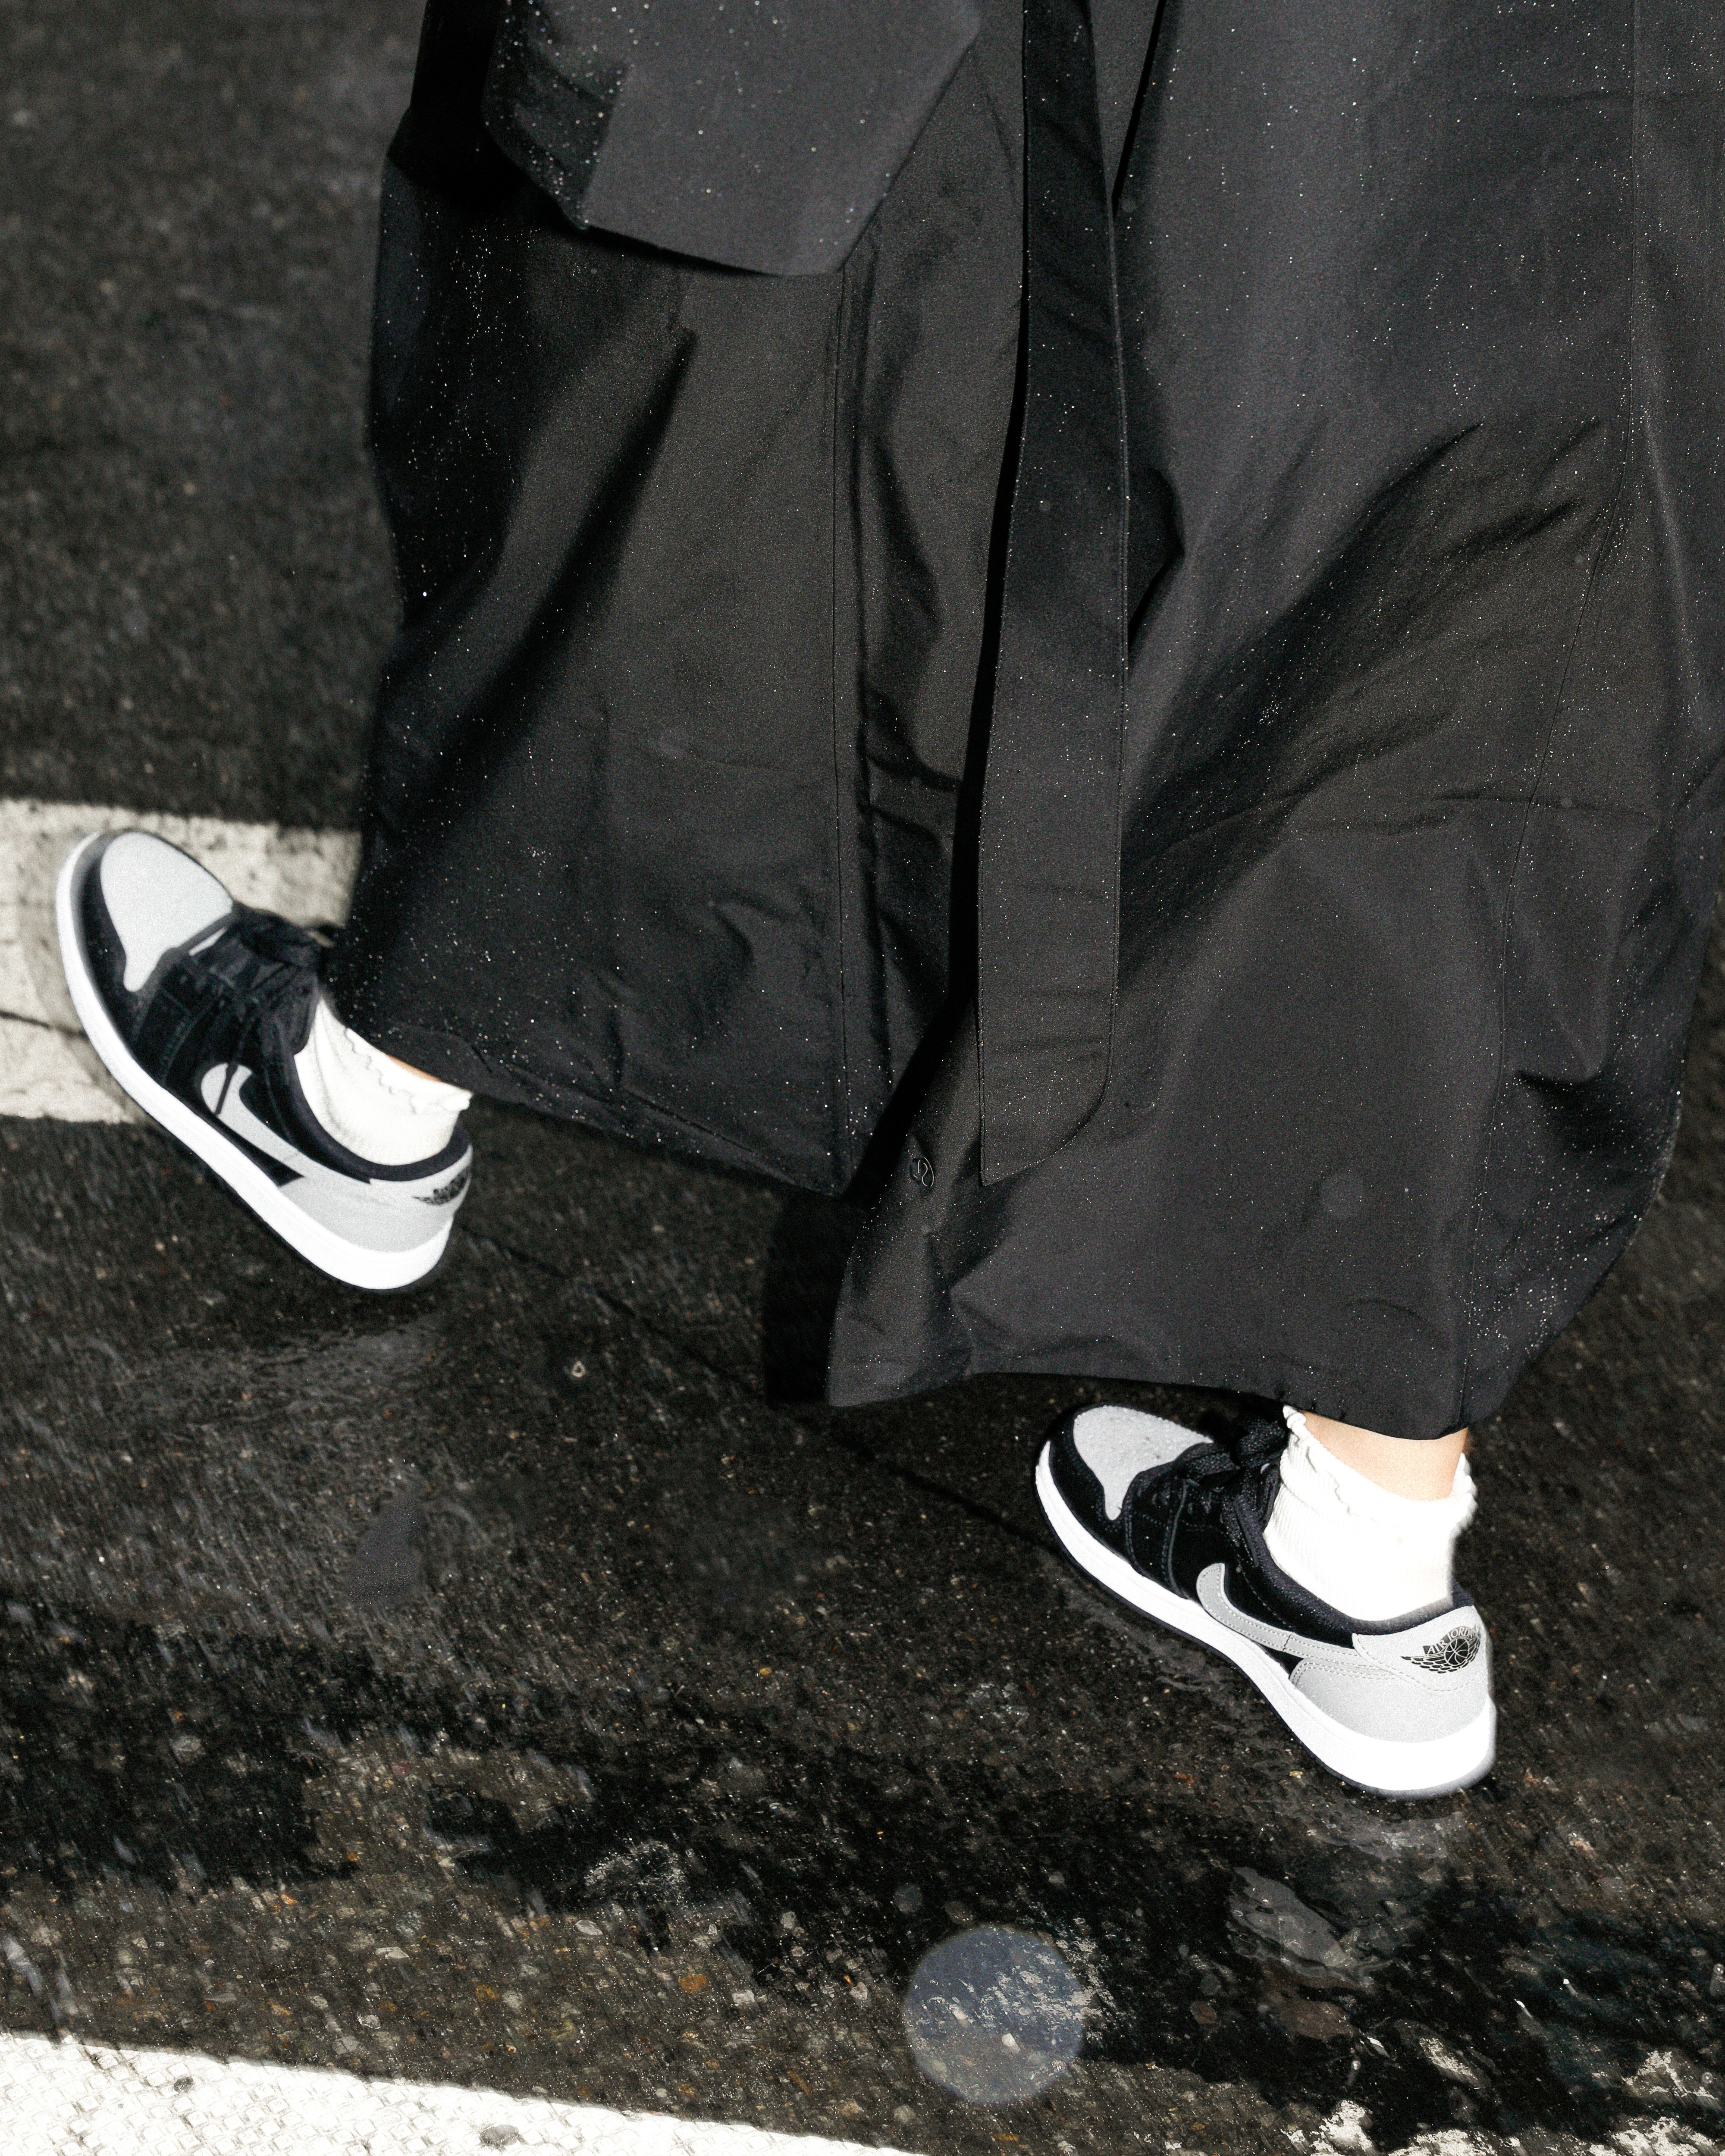 Person in black trousers and white socks wearing iconic black and white sneakers stepping onto a street